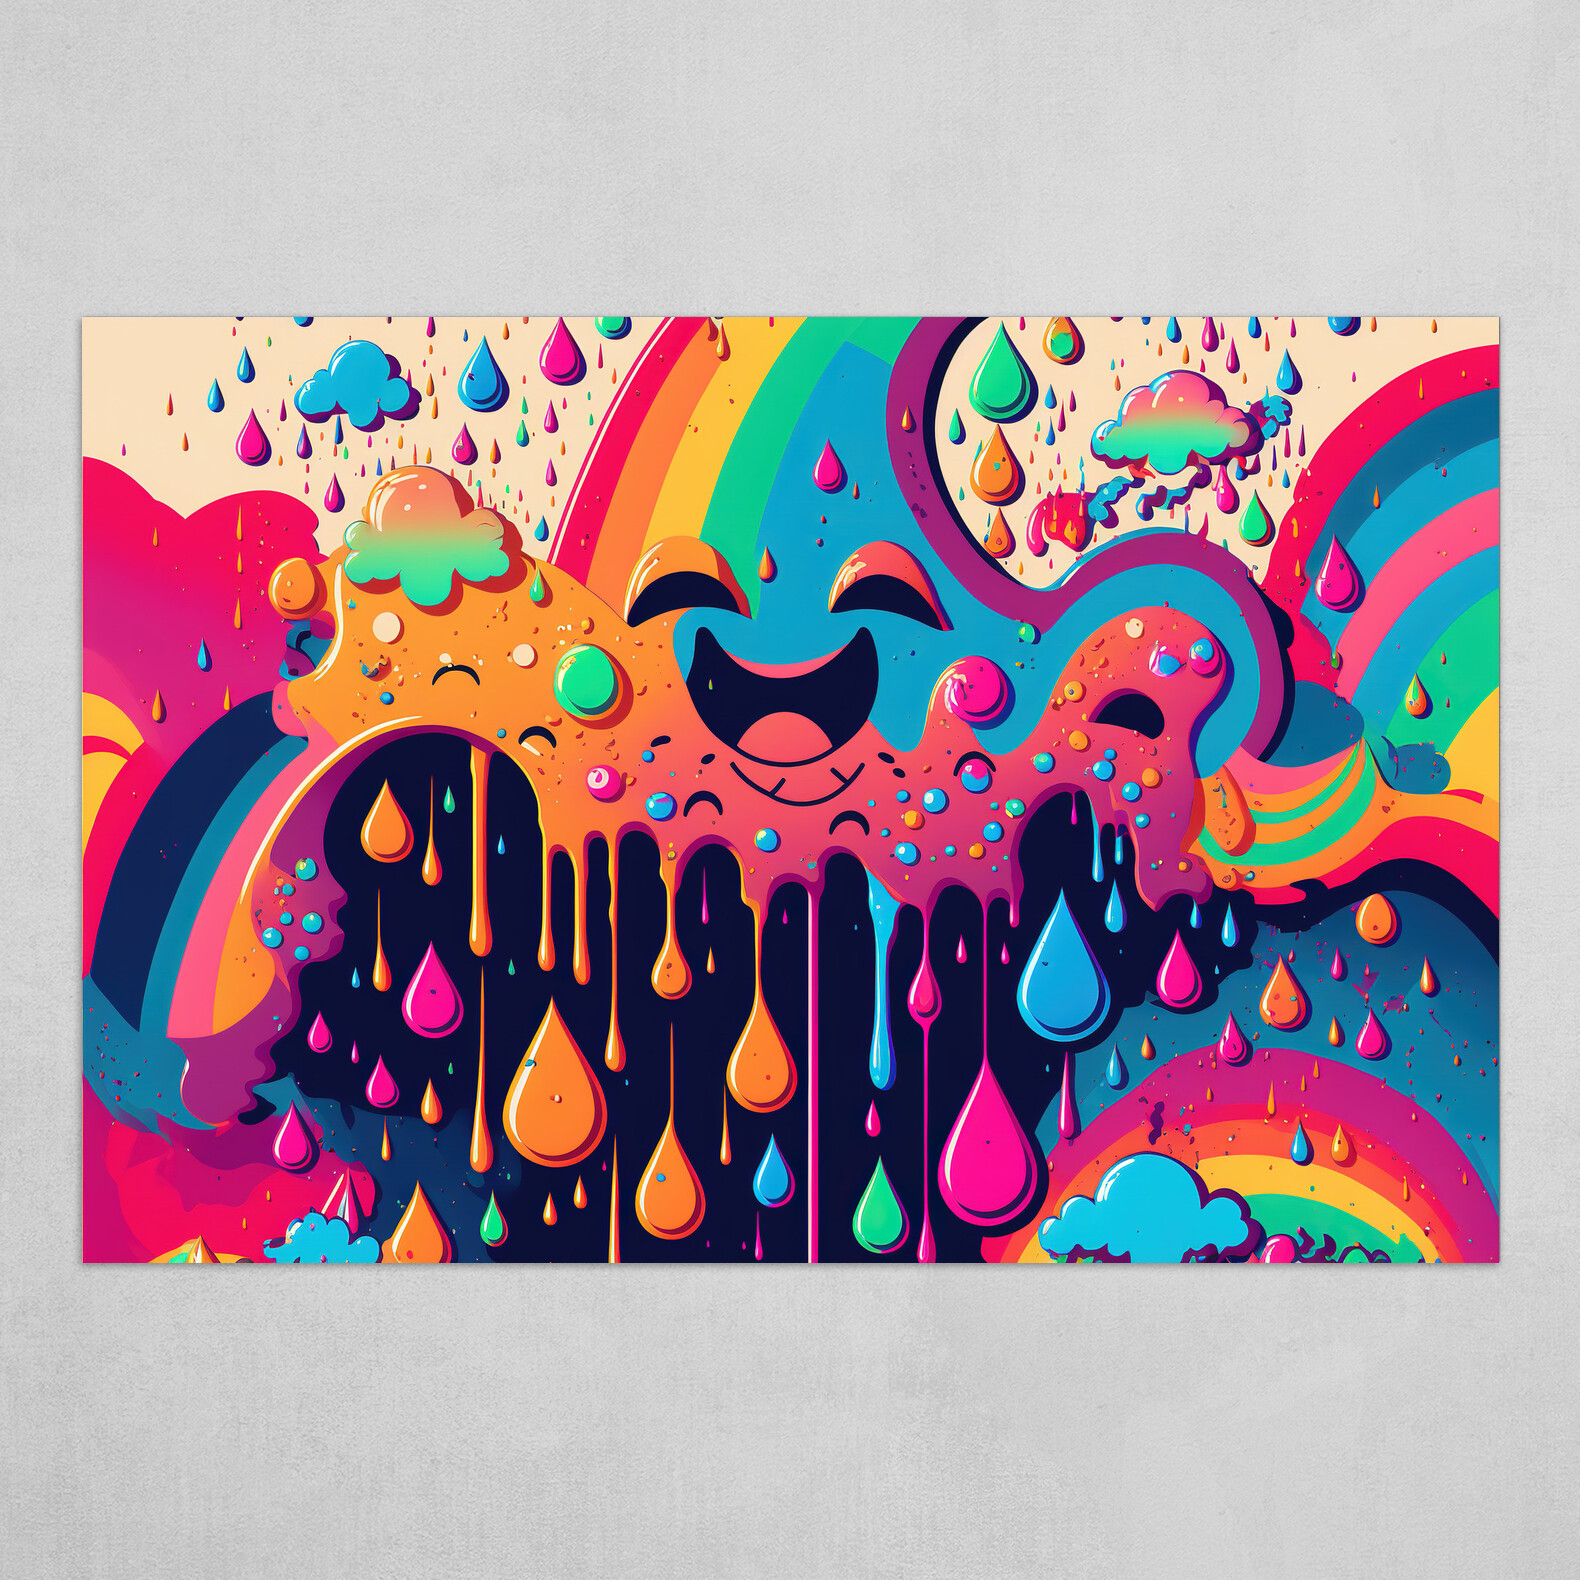 ArtStation - 8k+ Digital Print Download of Psychedelic Paint Drip Rainbow  Rain Clouds 1.2 - Psychedelia Dripping Paint Rainy Landscape - Artwork /  Illustration / Reference Art